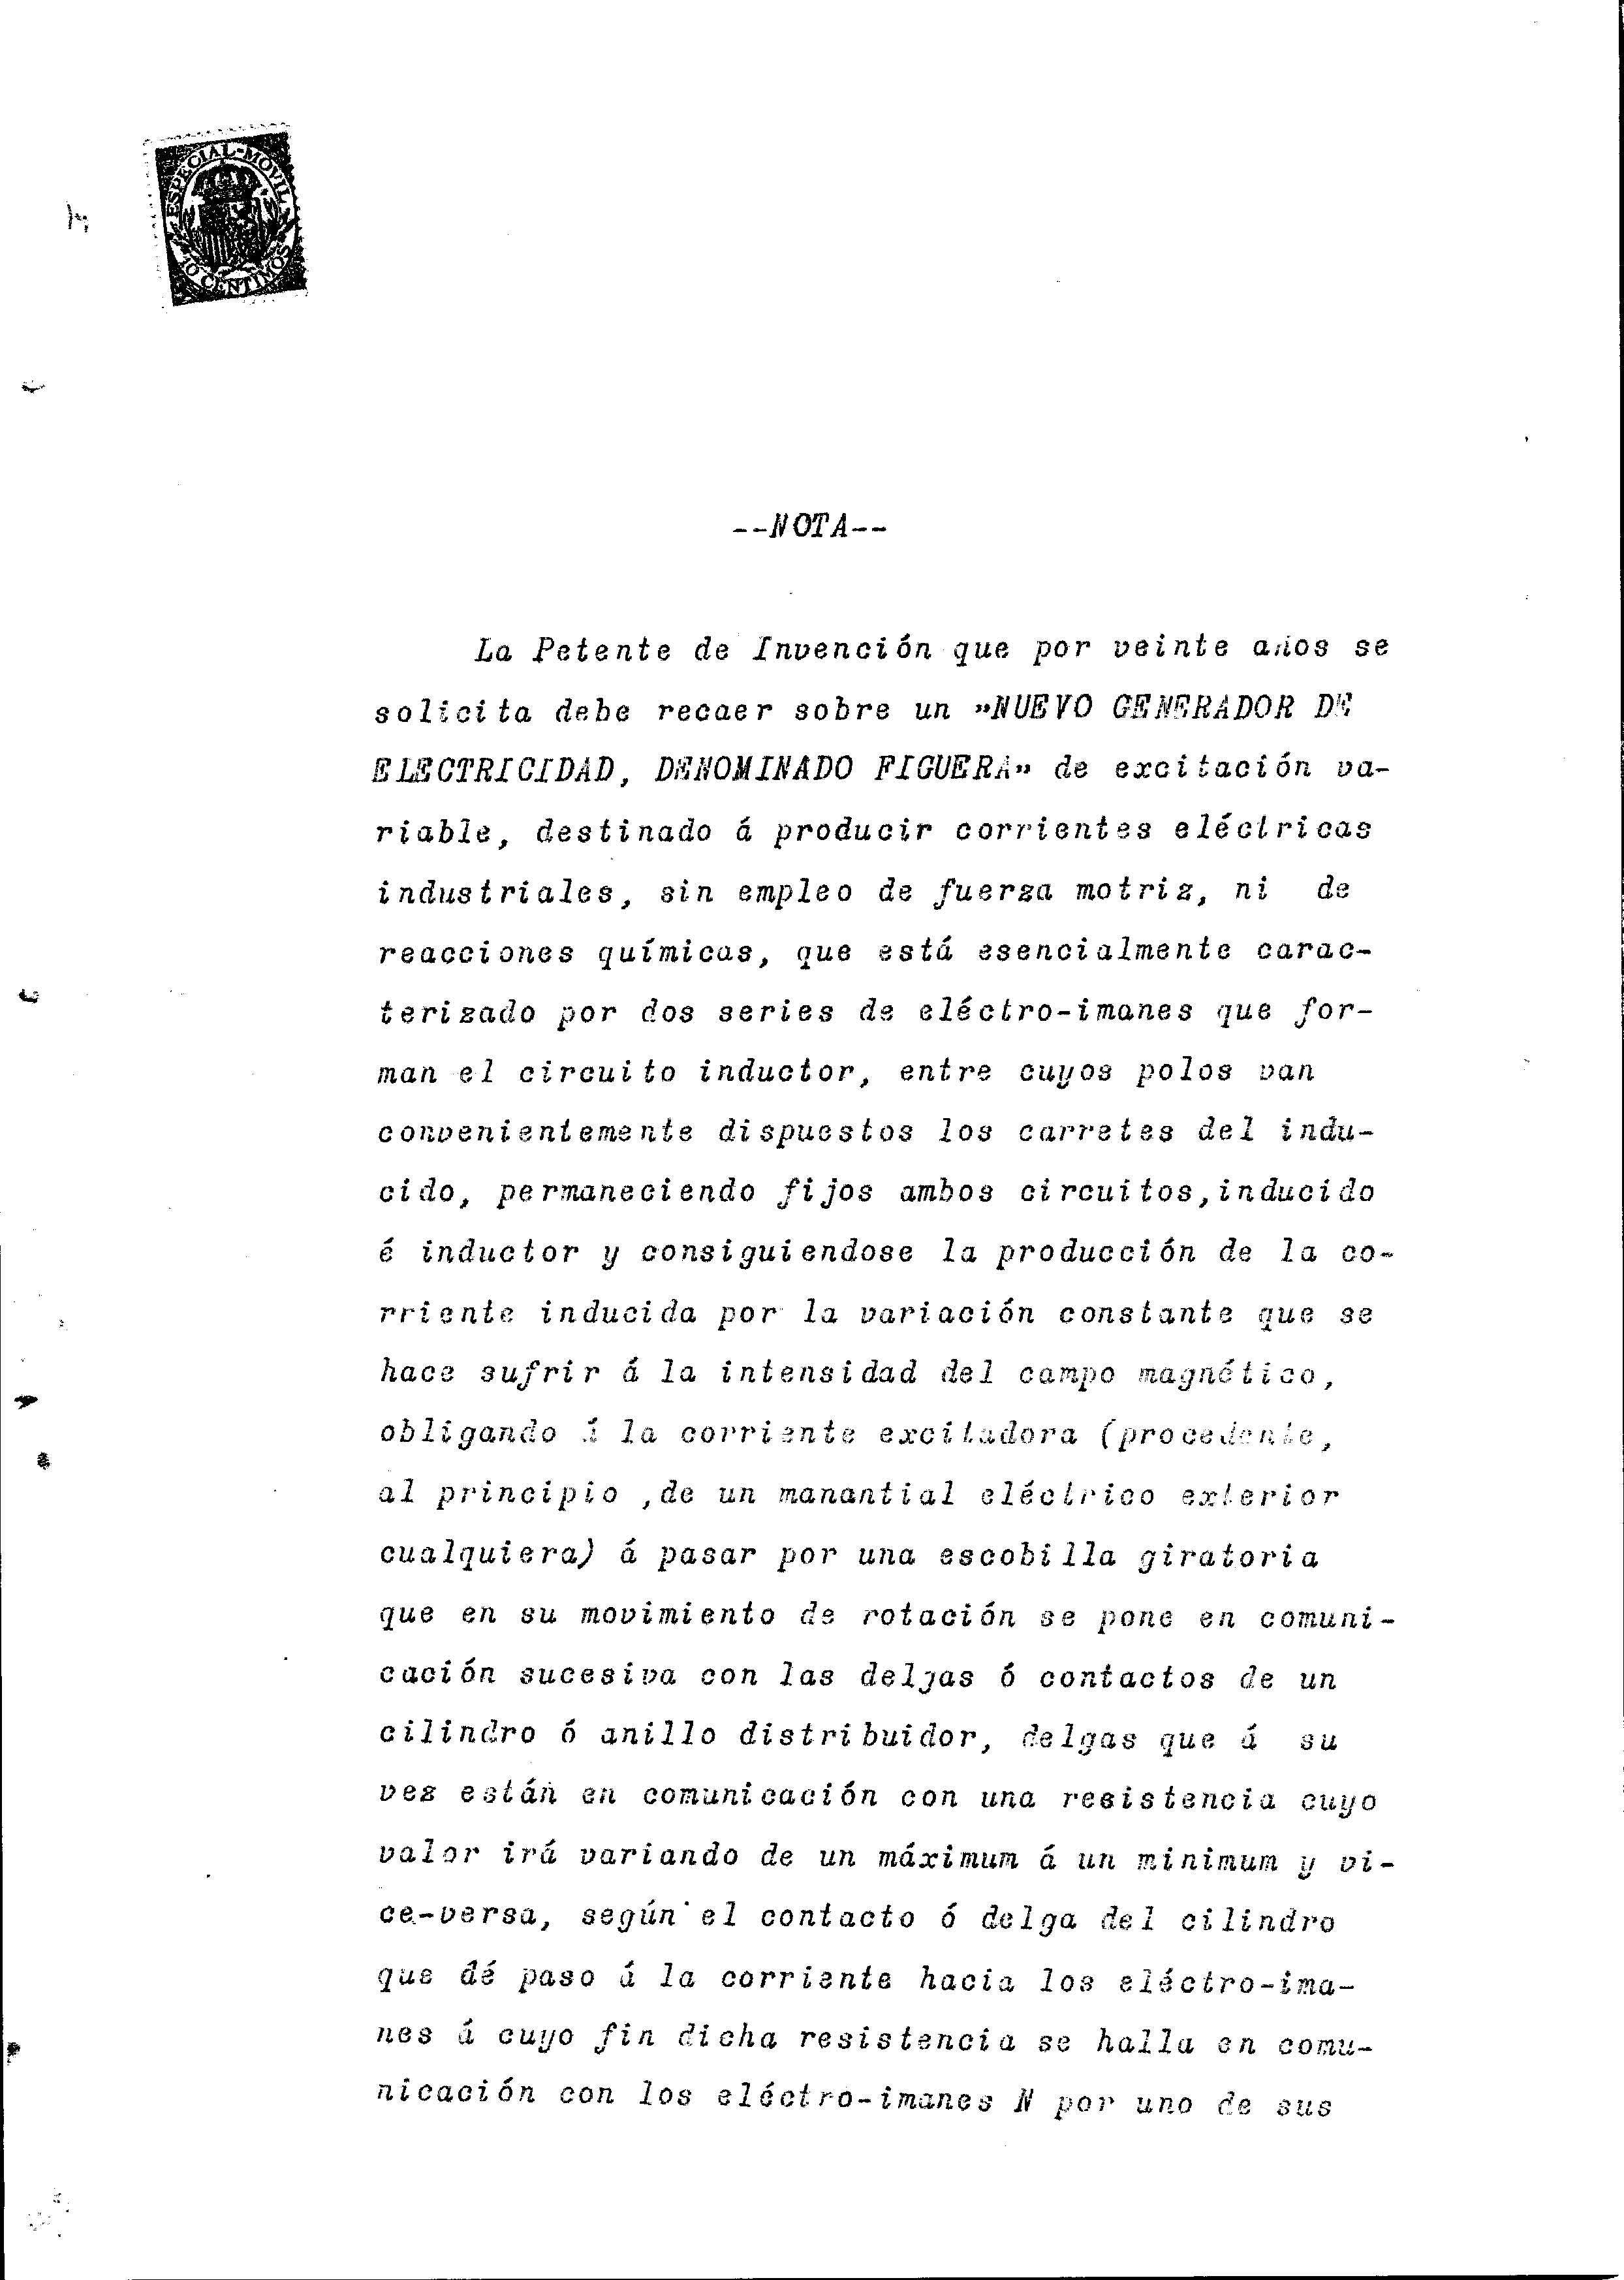 Clemente Figuera Patente 1908_Num_44267_scanned_OCR_Page_09.jpg